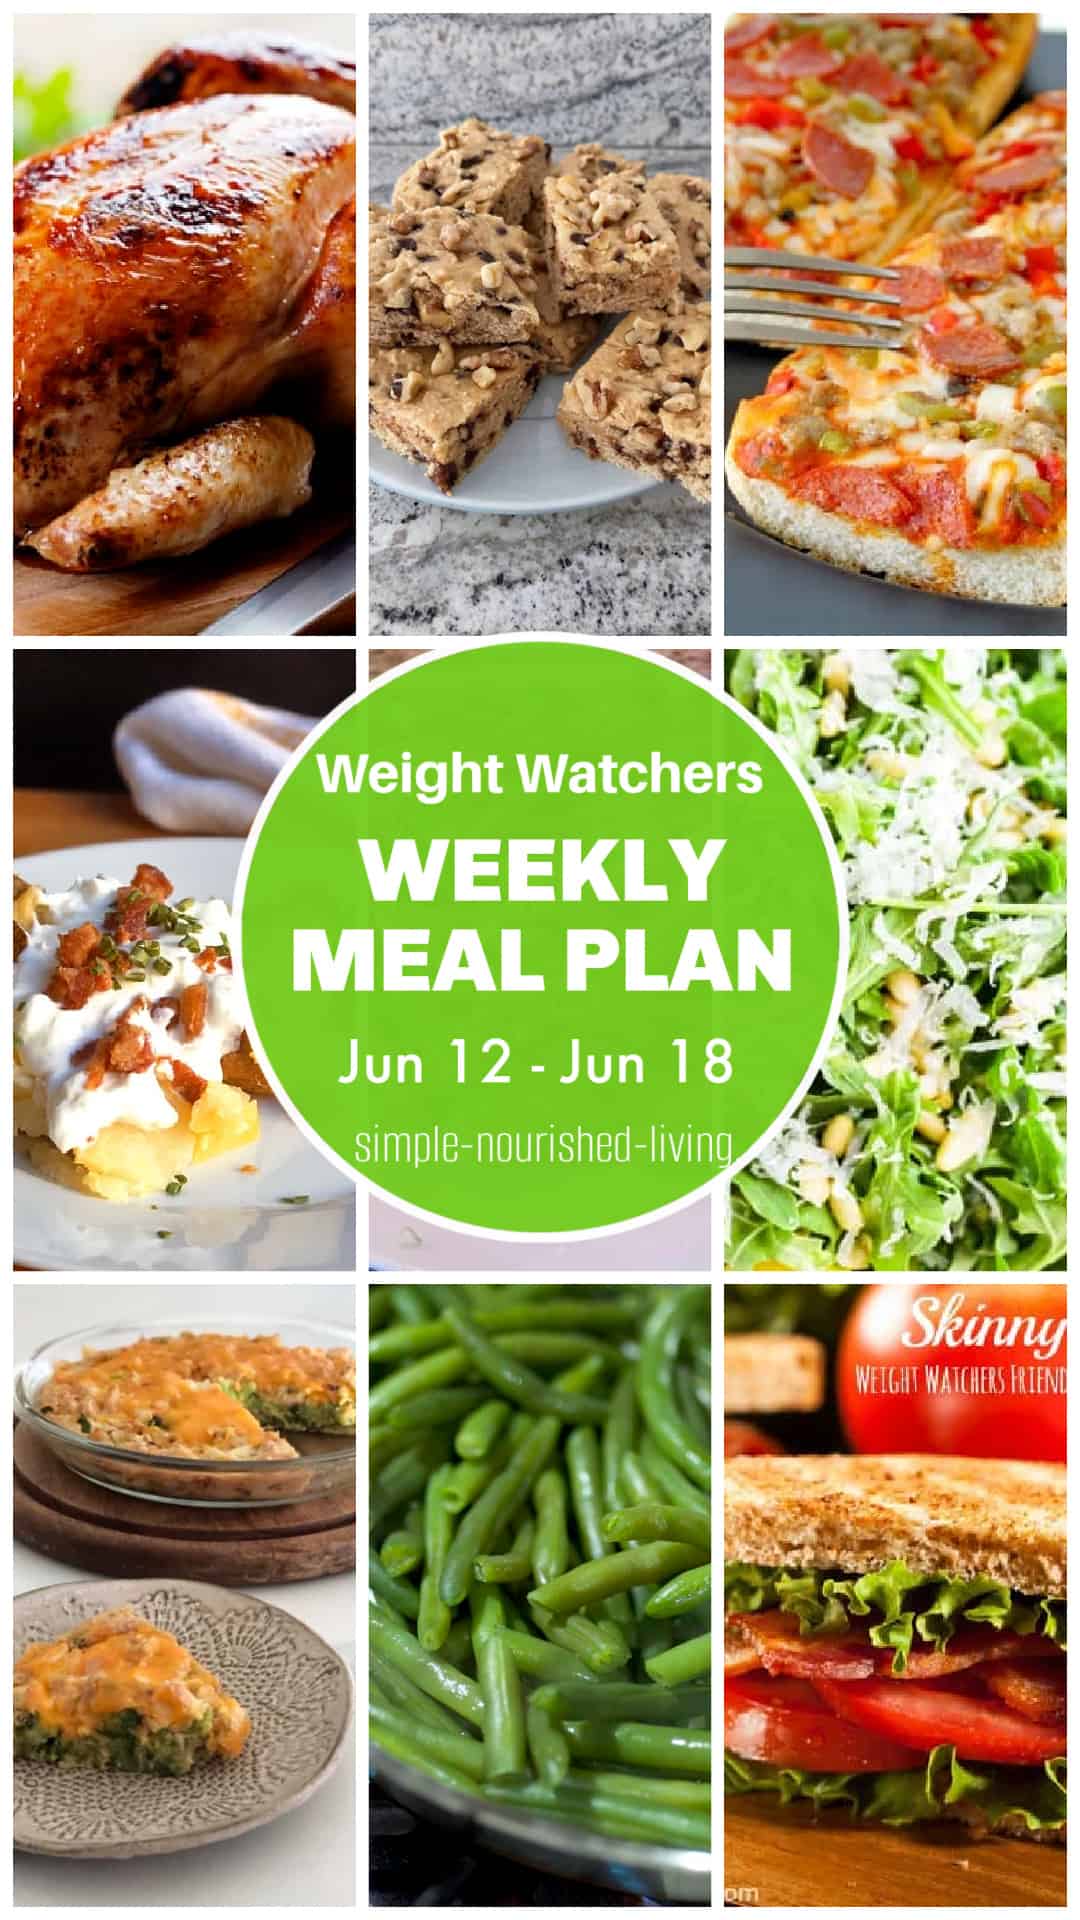 9 Frame Food Collage featuring: rotisserie chicken, chocolate chip kodiak snack cake, baked potato, simple green salad, impossible chicken broccoli pie, green beans, BLT with green round text box overlay: Weight Watchers Weekly Meal Plan 6/12 - 6/18